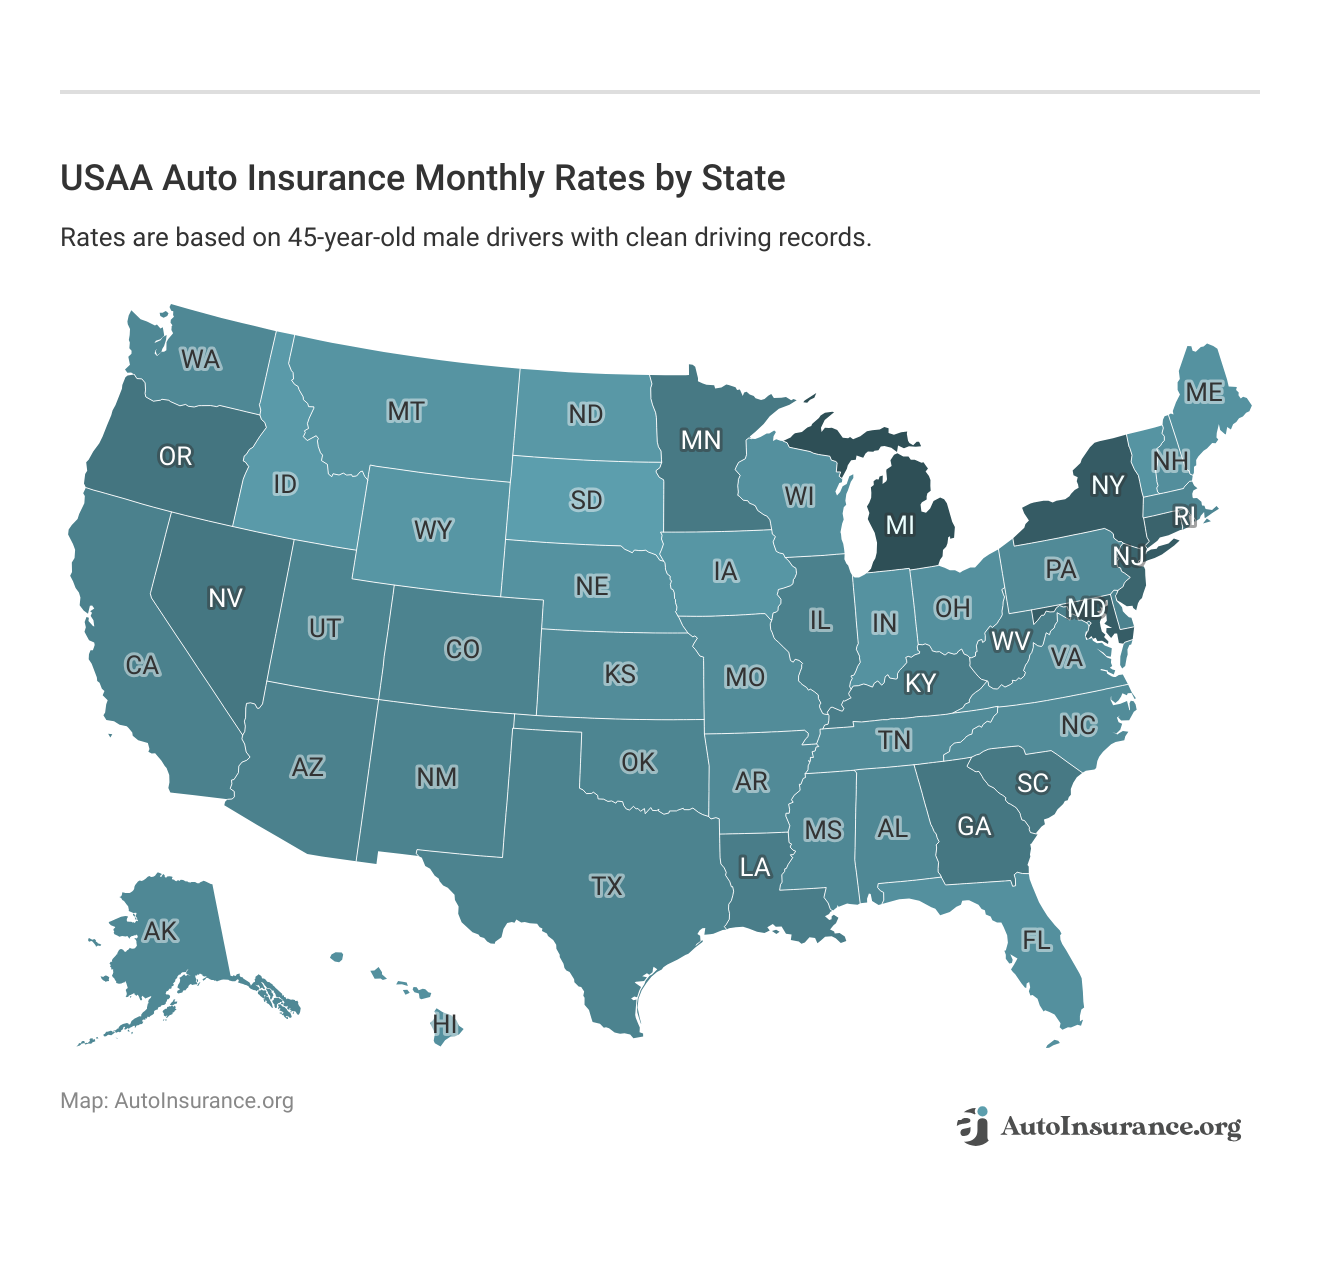 <h3>USAA Auto Insurance Monthly Rates by State</h3>